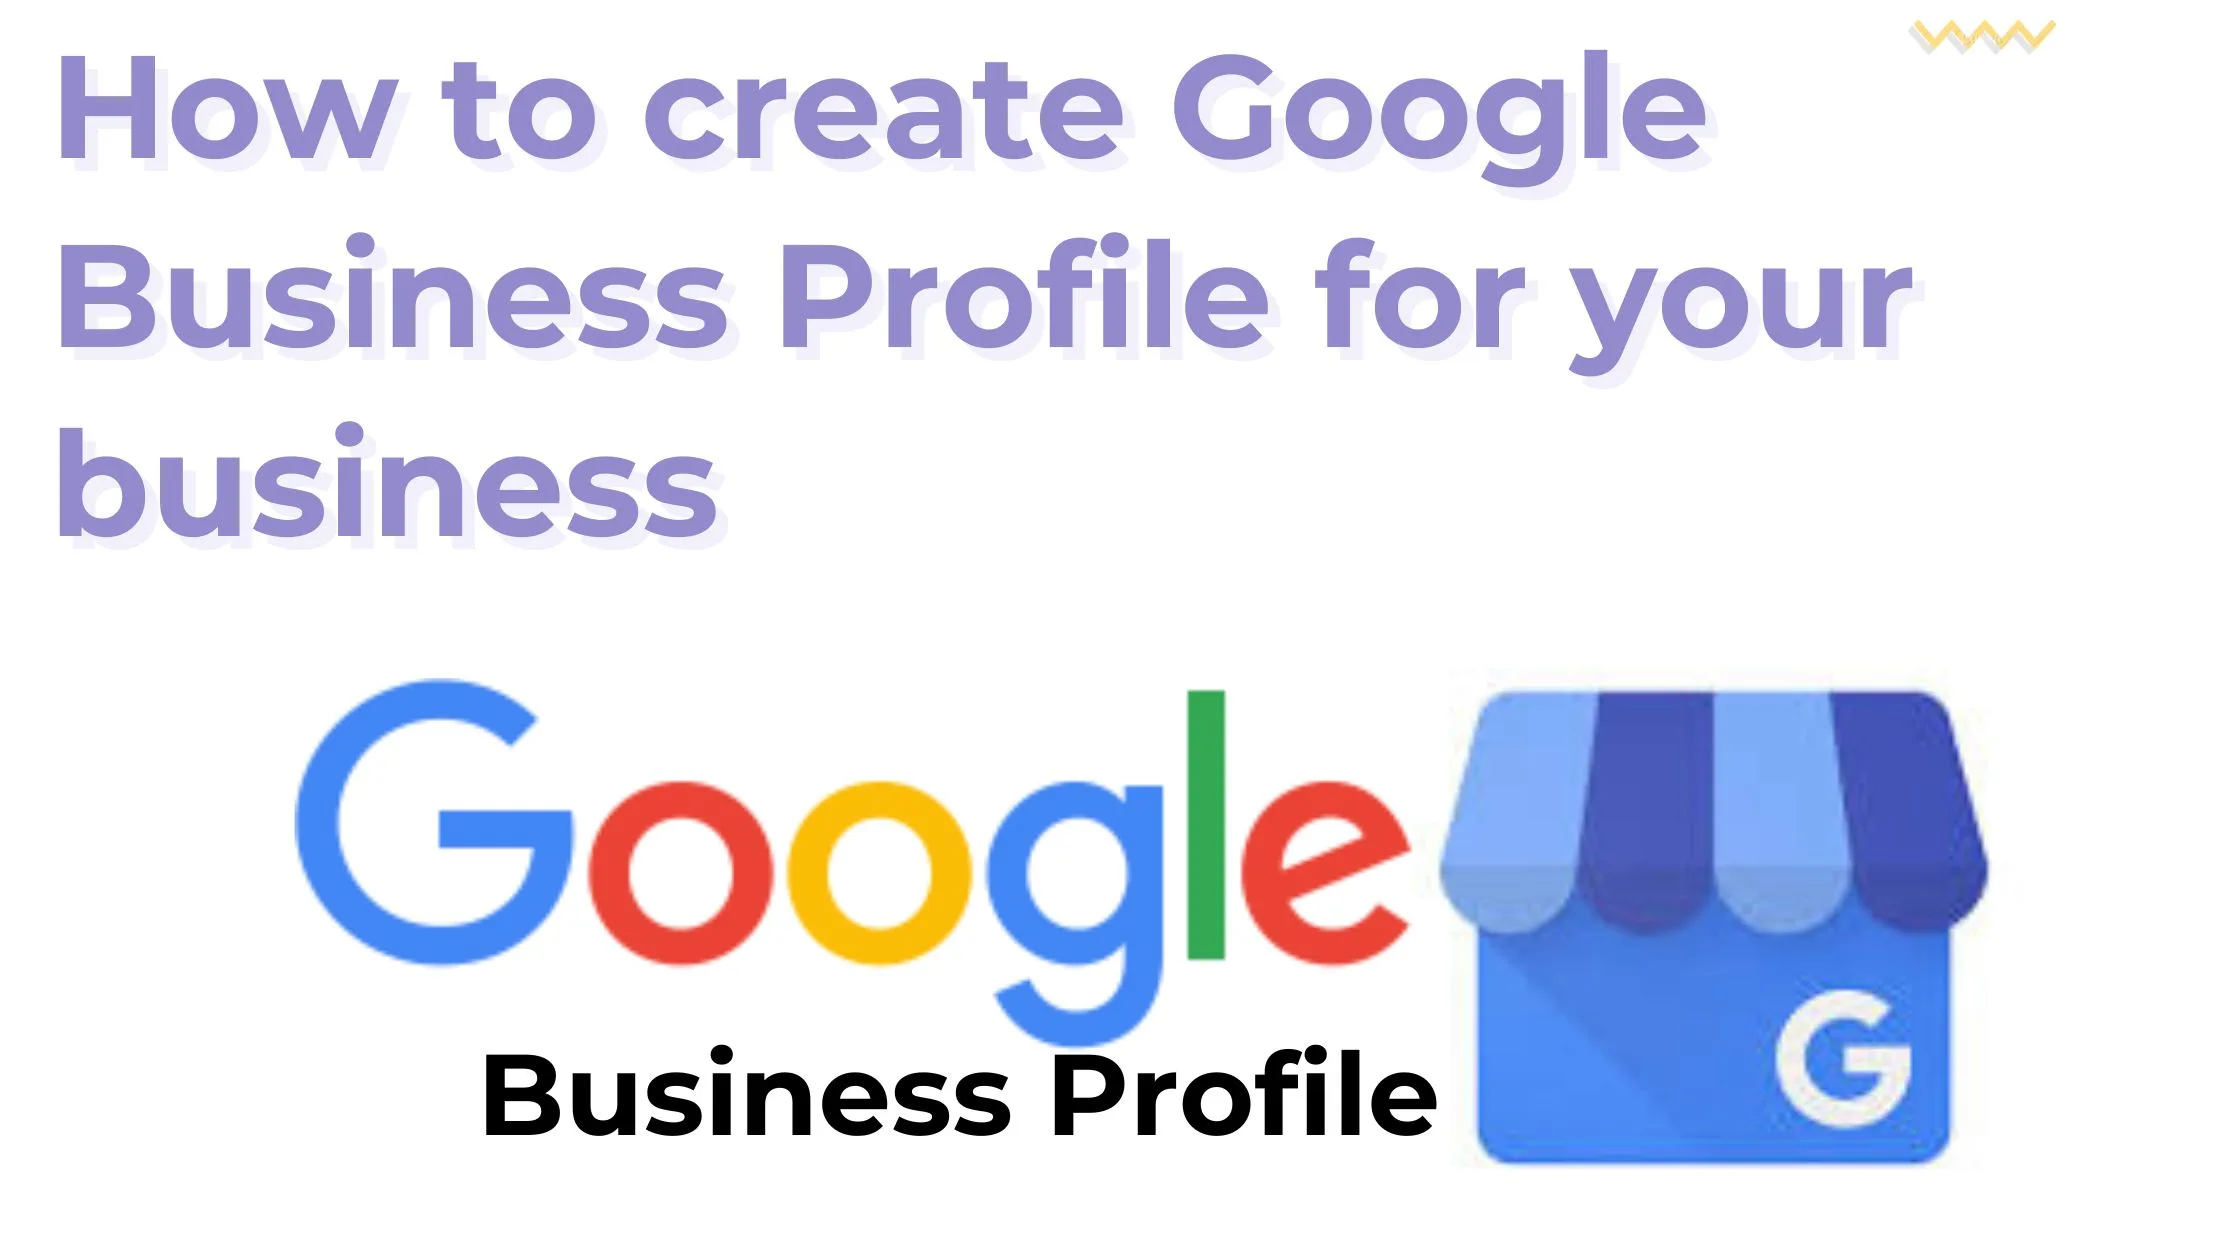 How to create a Google business profile for free?